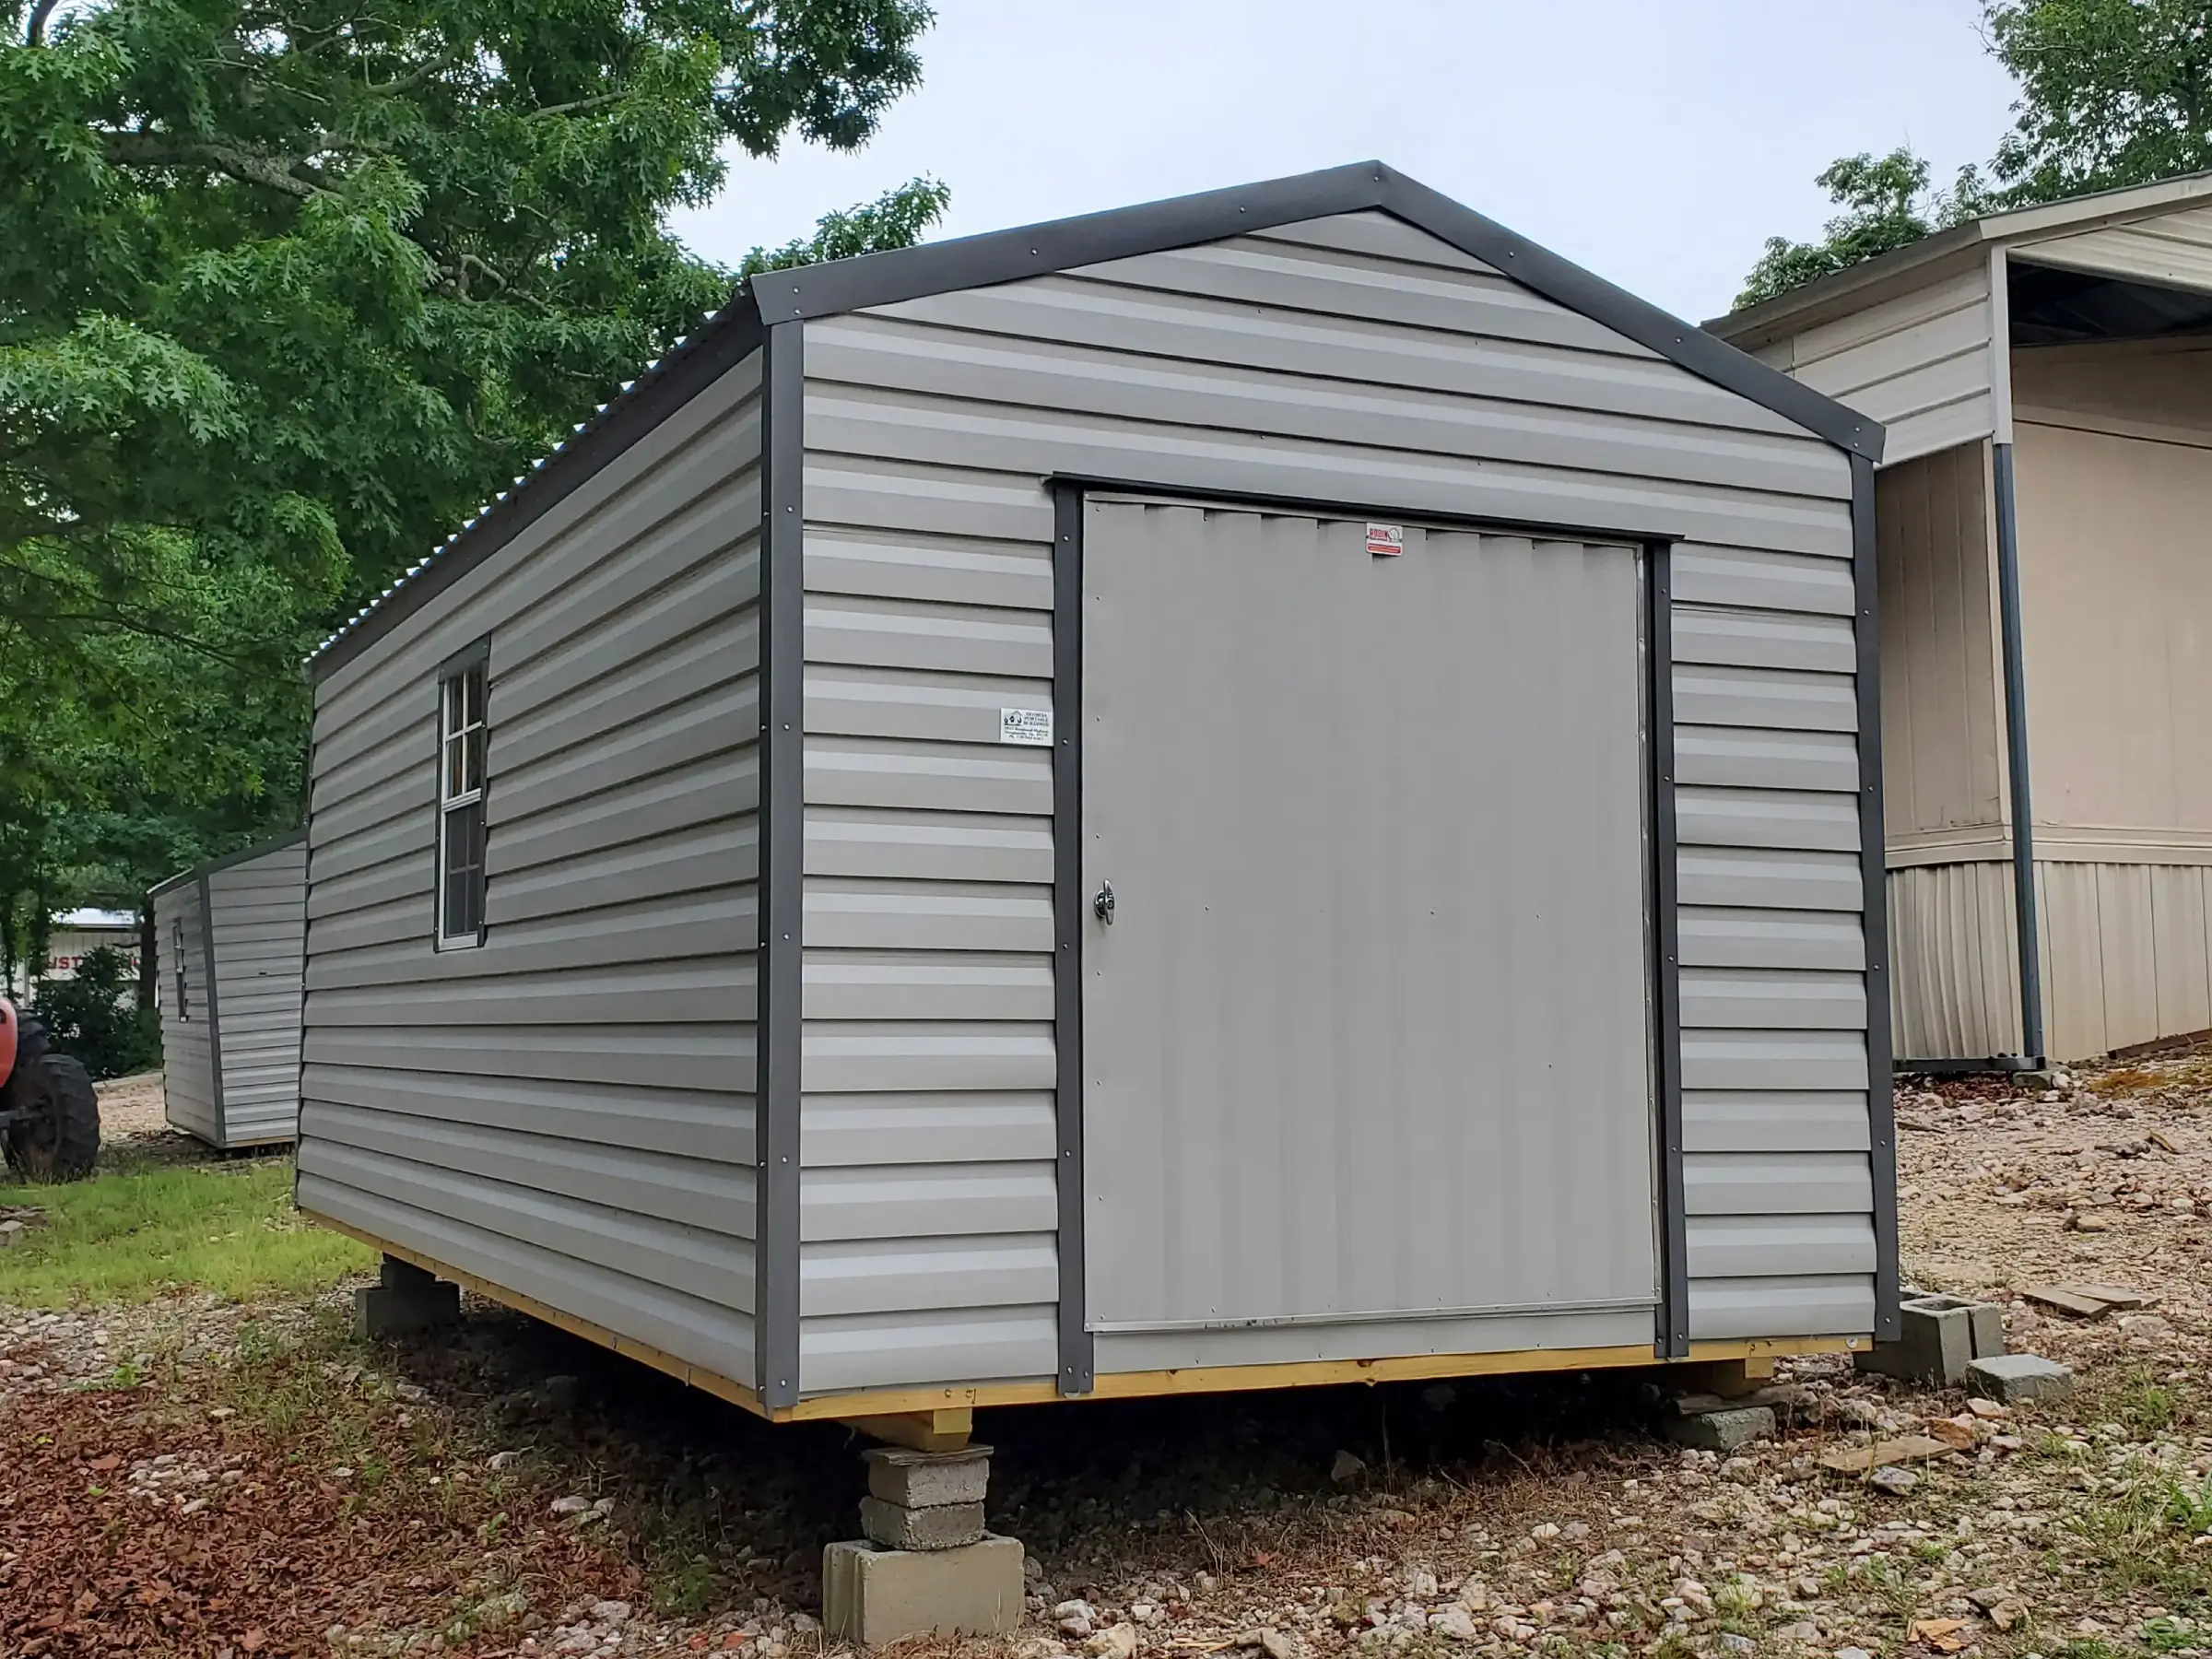 10 ft. by 20 ft. highly functional portable shed building with large end door and two windows.